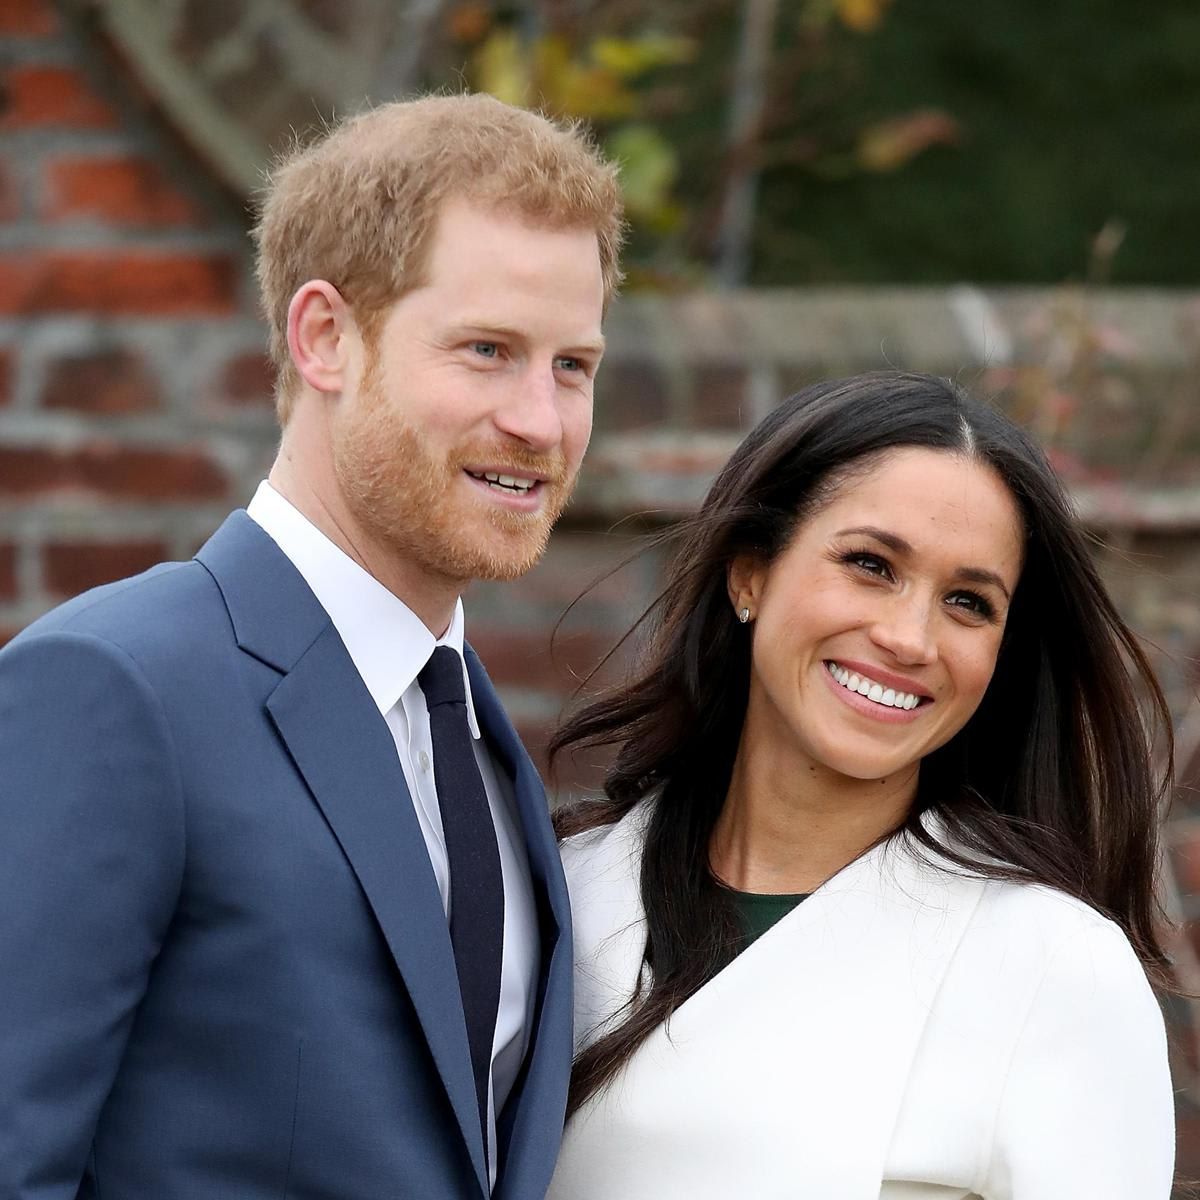 In Netflix's Meghan & Harry, the Duke of Sussex revealed that he and Meghan "met over Instagram." He said in the docuseries, "I was scrolling through my feed and someone who was a friend had this video of the two of them, like a Snapchat." The Prince recalled, "I was like, 'Who is that?'" They ended up getting each other's numbers and met when Meghan was in London for Wimbledon in 2016.